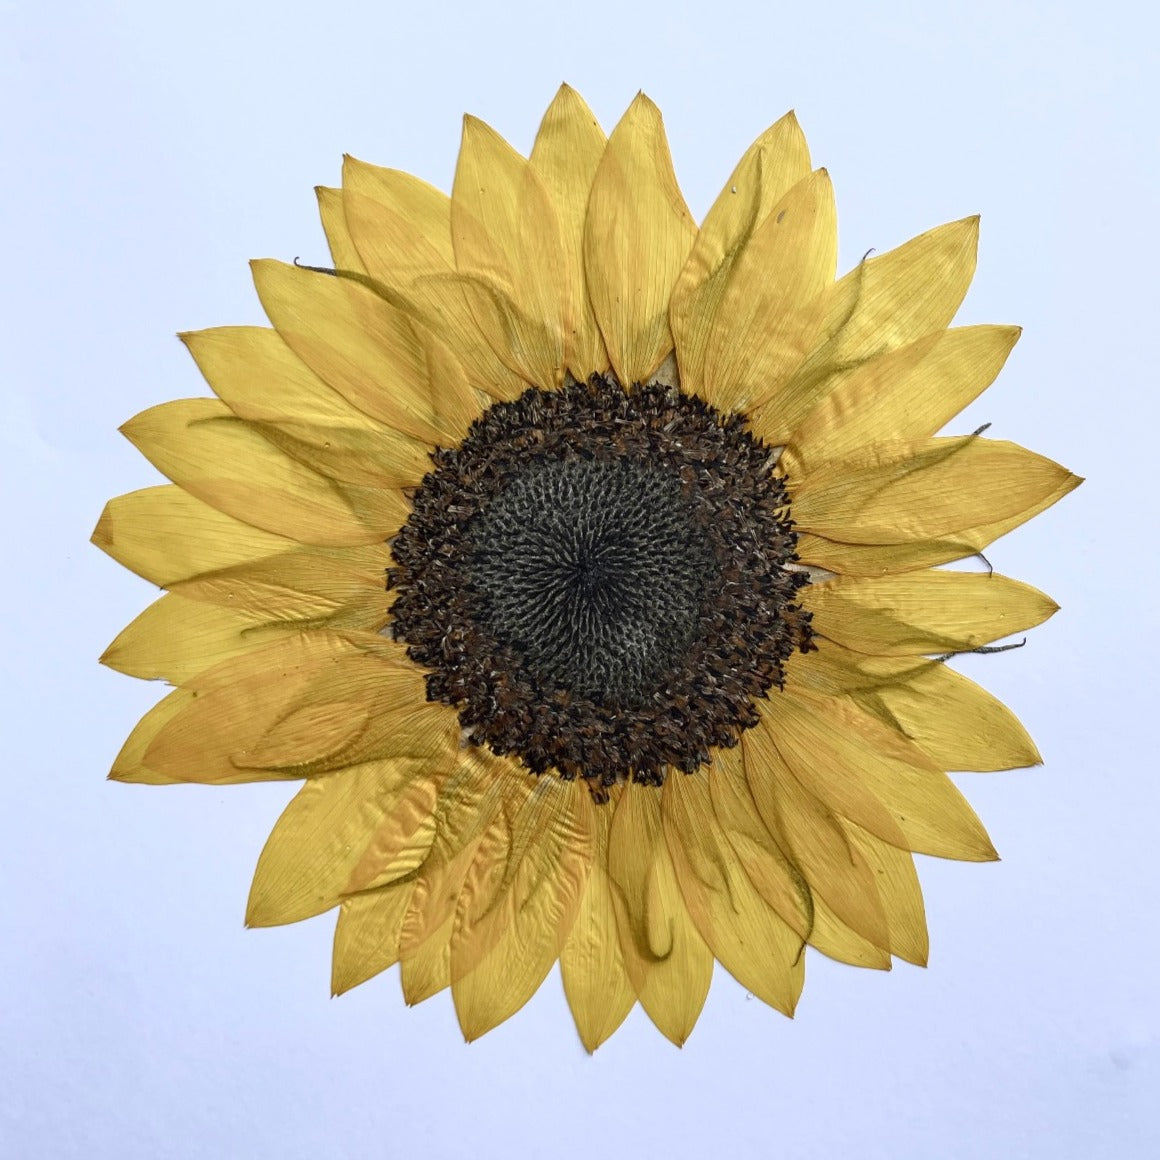 How to press a sunflower whole